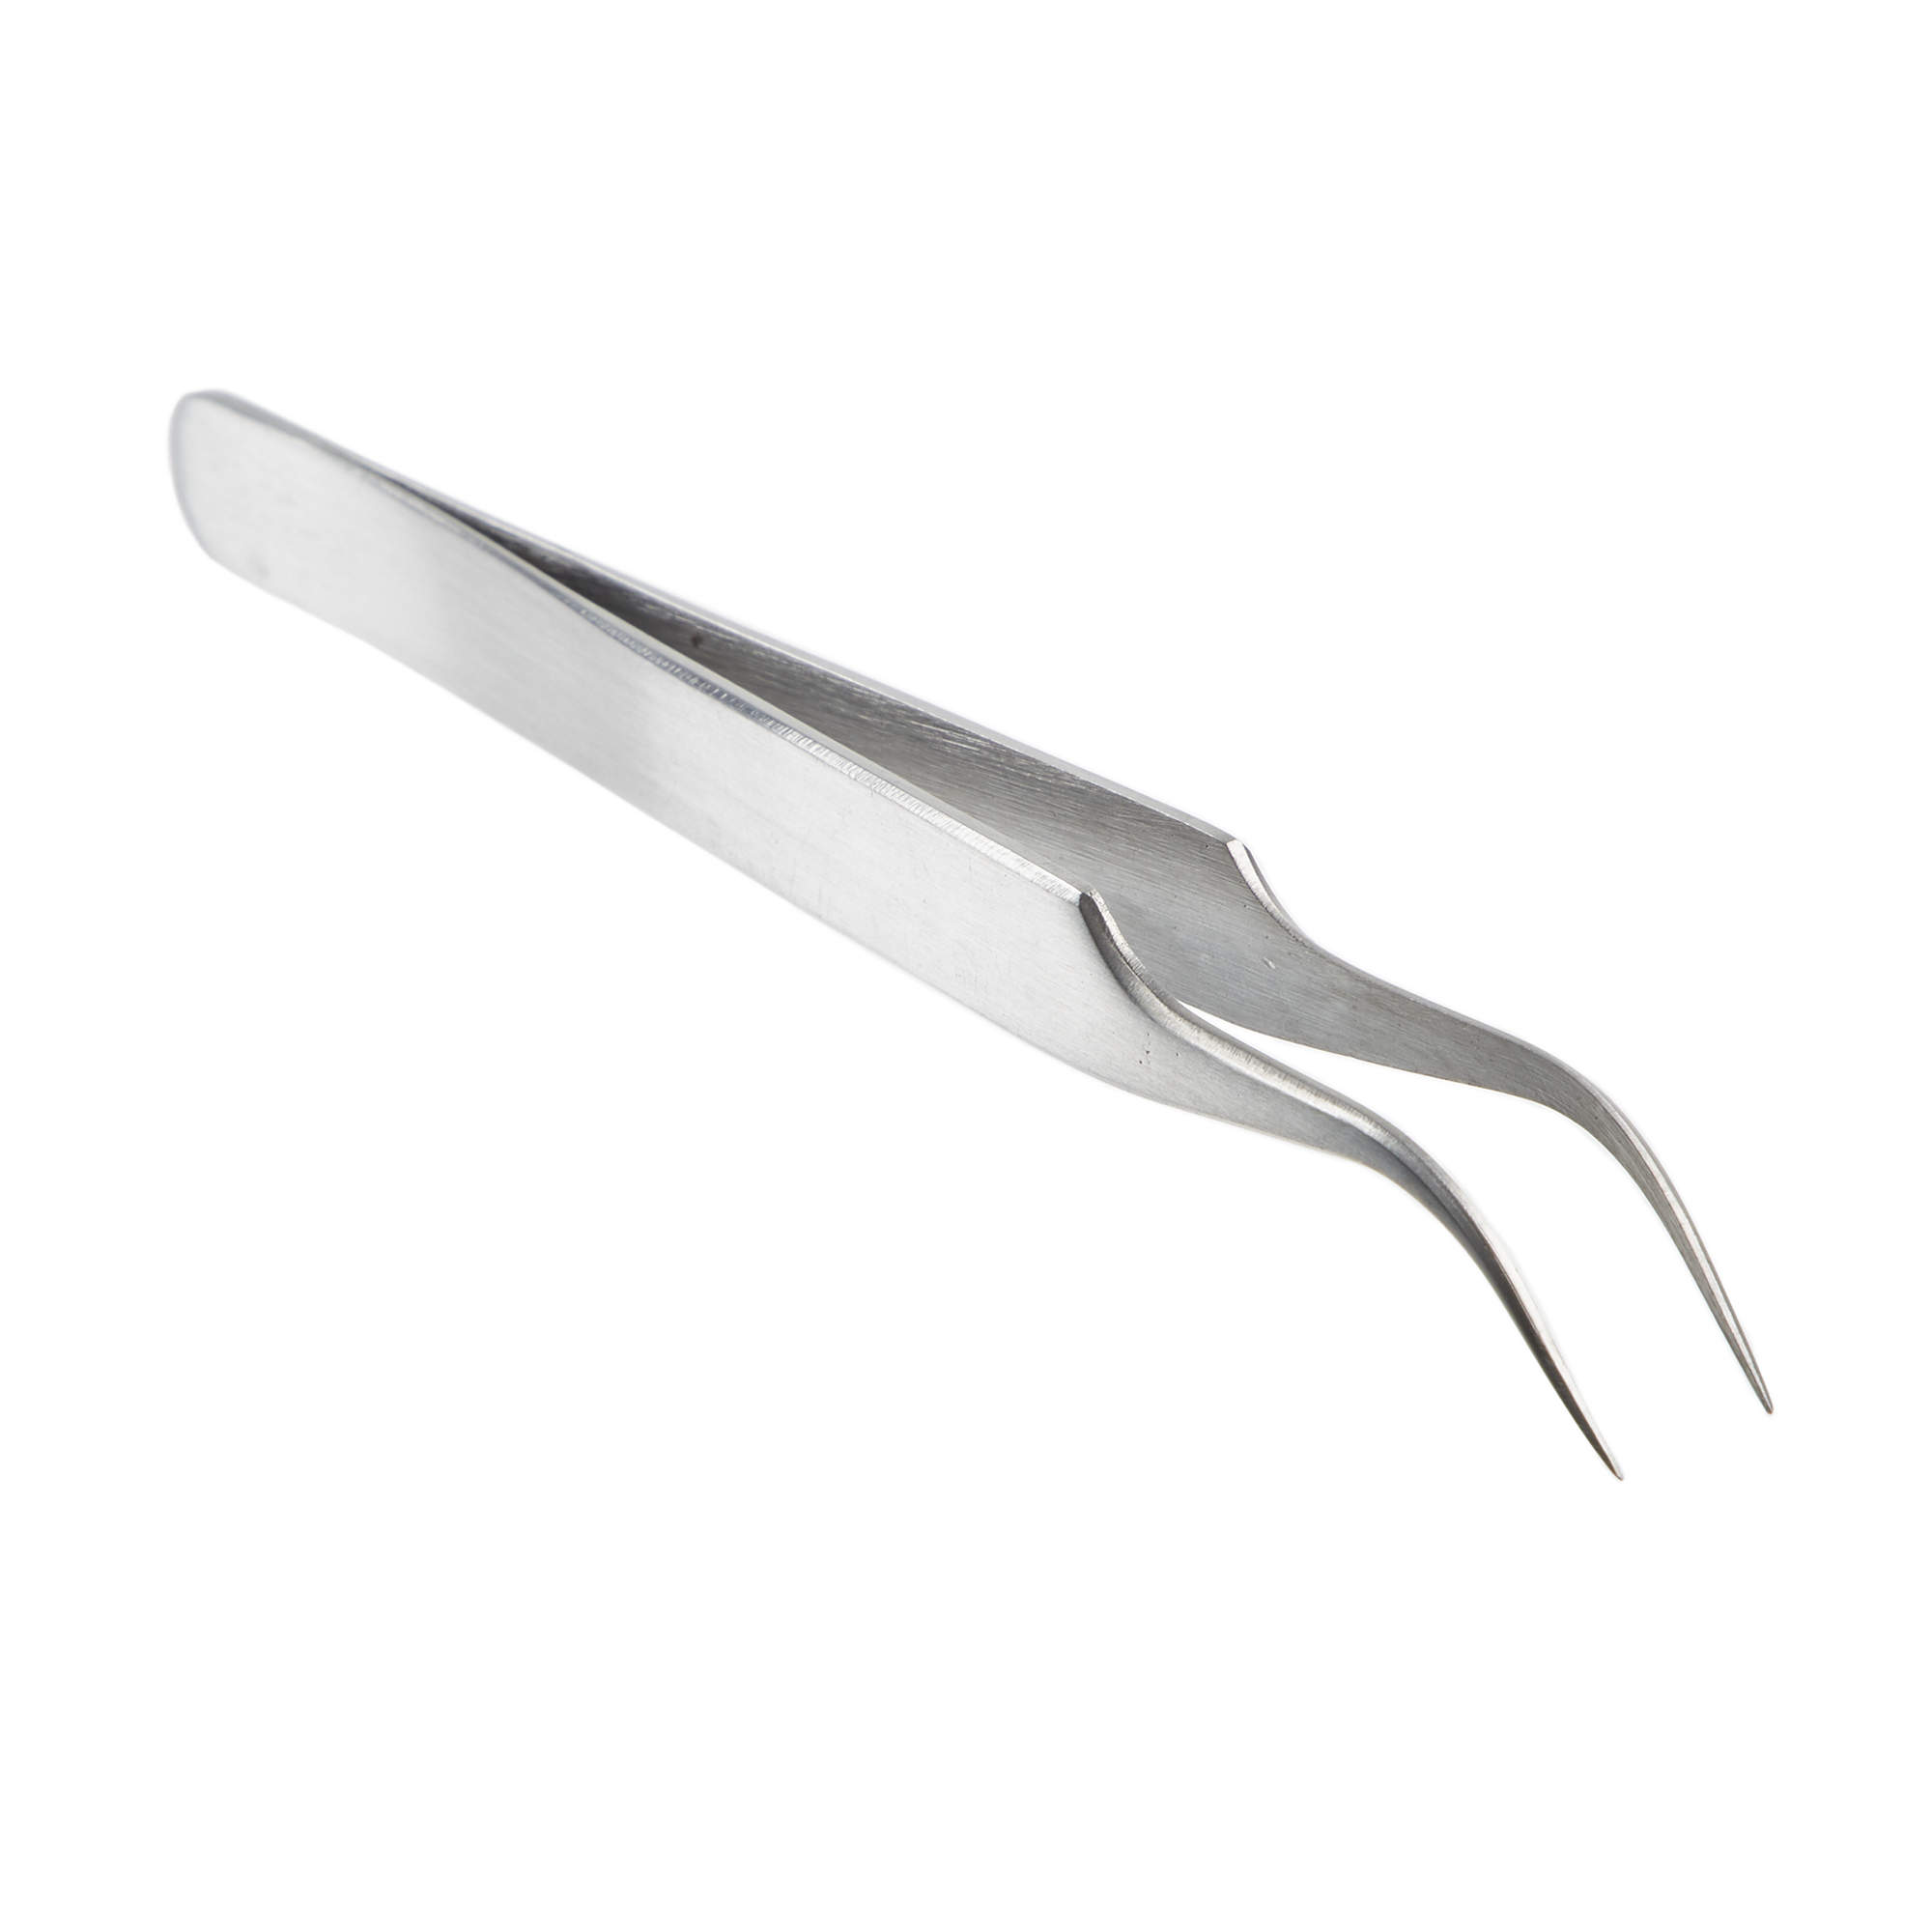 A1689806 - Watch Makers Pointed Forceps - 110mm | AtoZ Supplies